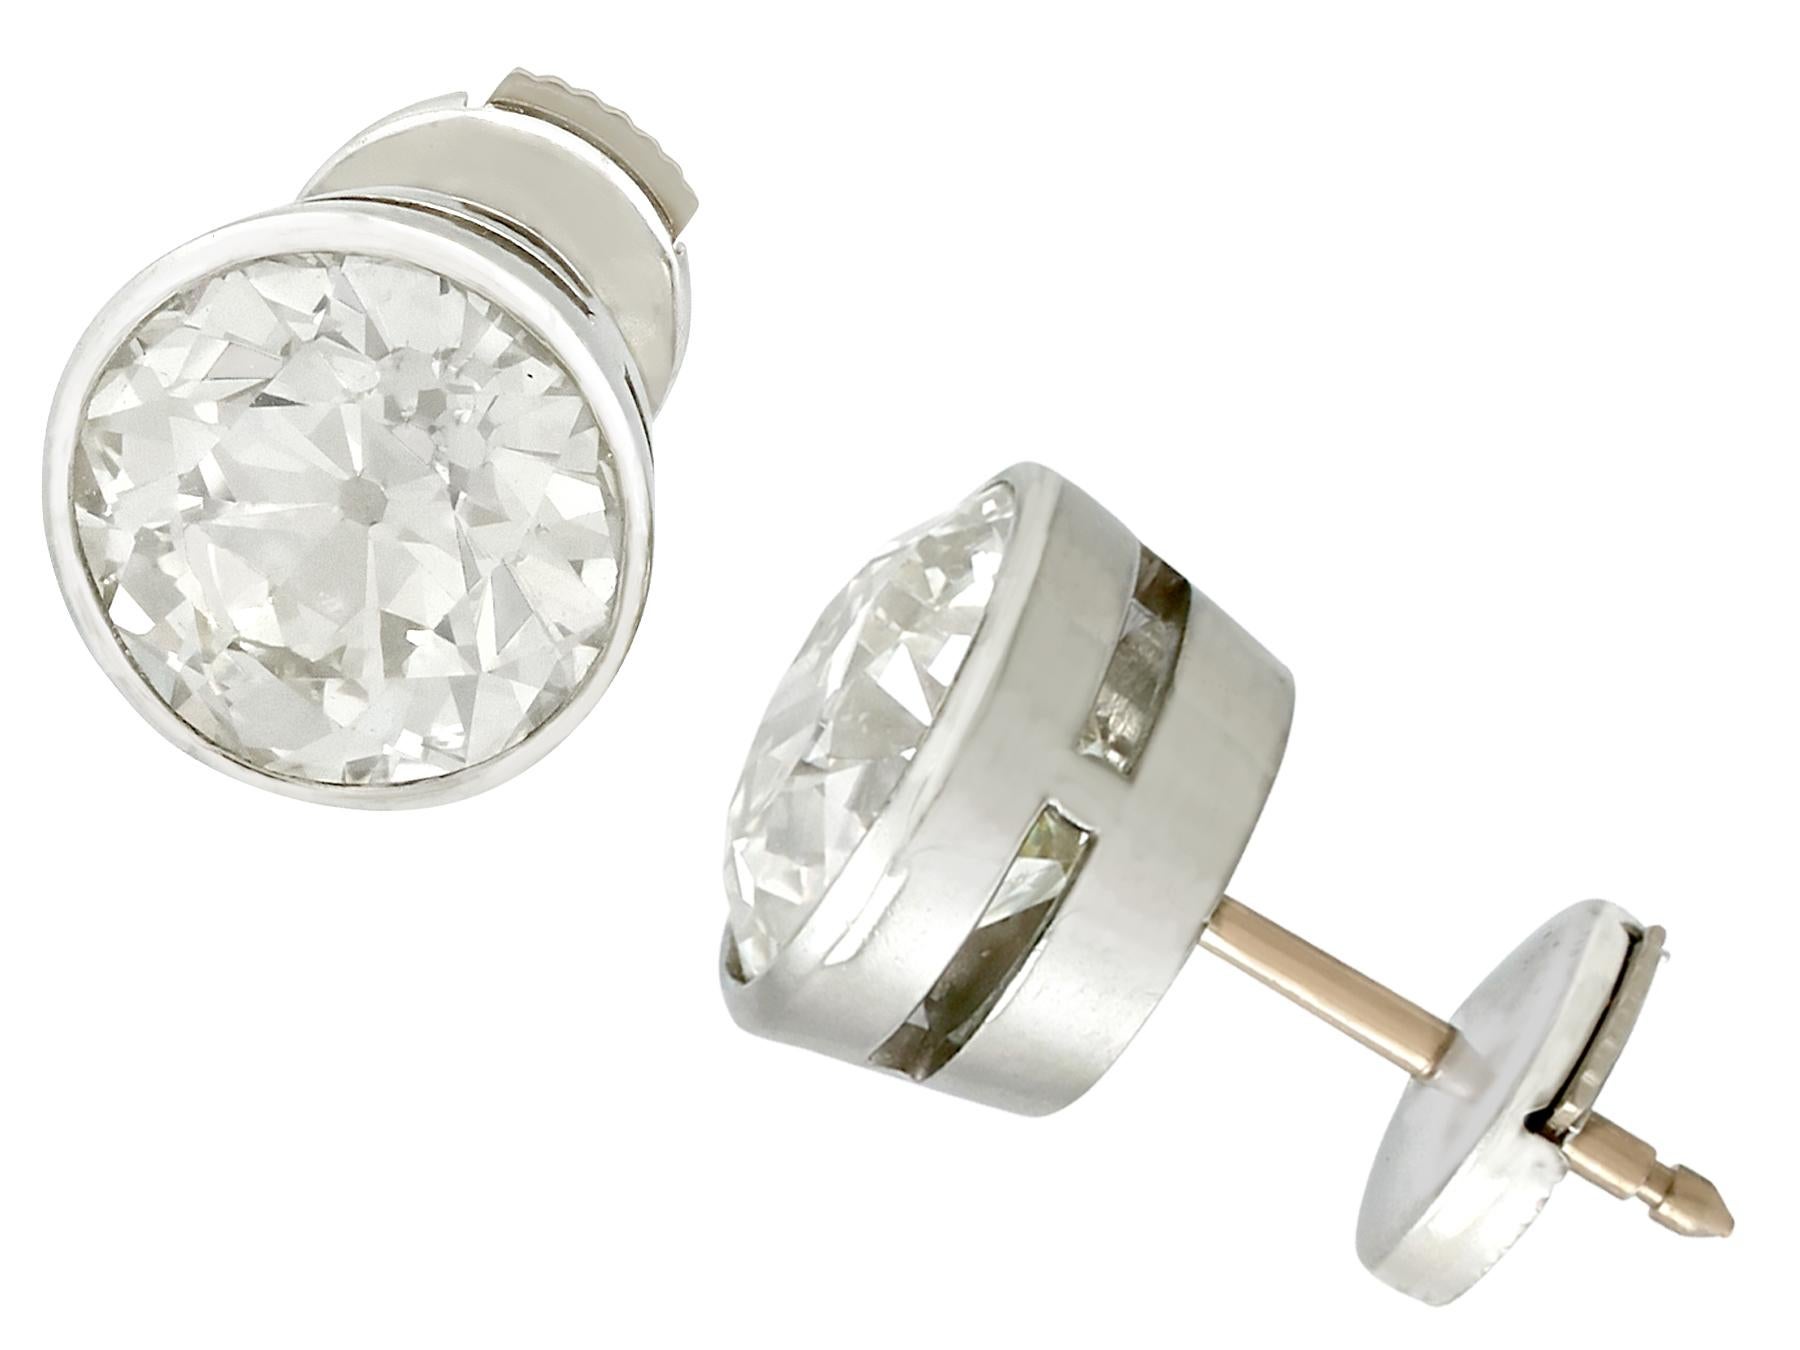 A stunning pair of contemporary 18k white gold stud earrings set with 6.10cts of antique (circa 1900) diamond; part of our diverse antique jewellery and estate jewelry collections.

These stunning, fine and impressive antique 6.10ct diamond stud